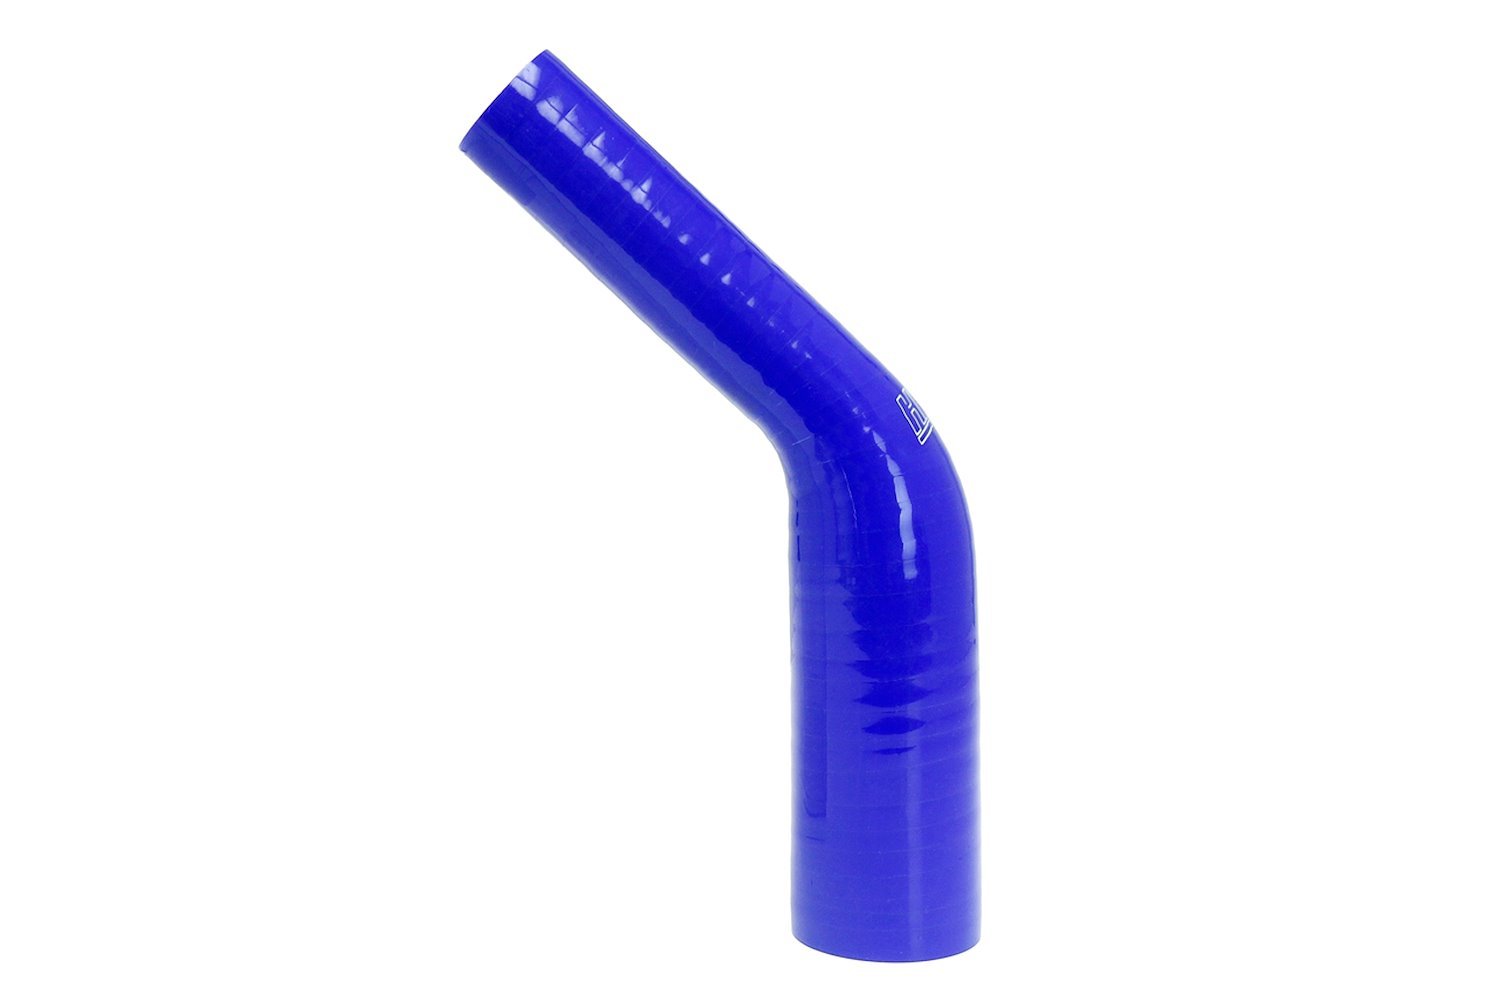 HTSER45-118-187-BLUE Silicone 45-Degree Elbow Hose, High-Temp Reinforced, 1-3/16 in. - 1-7/8 in. ID, Blue